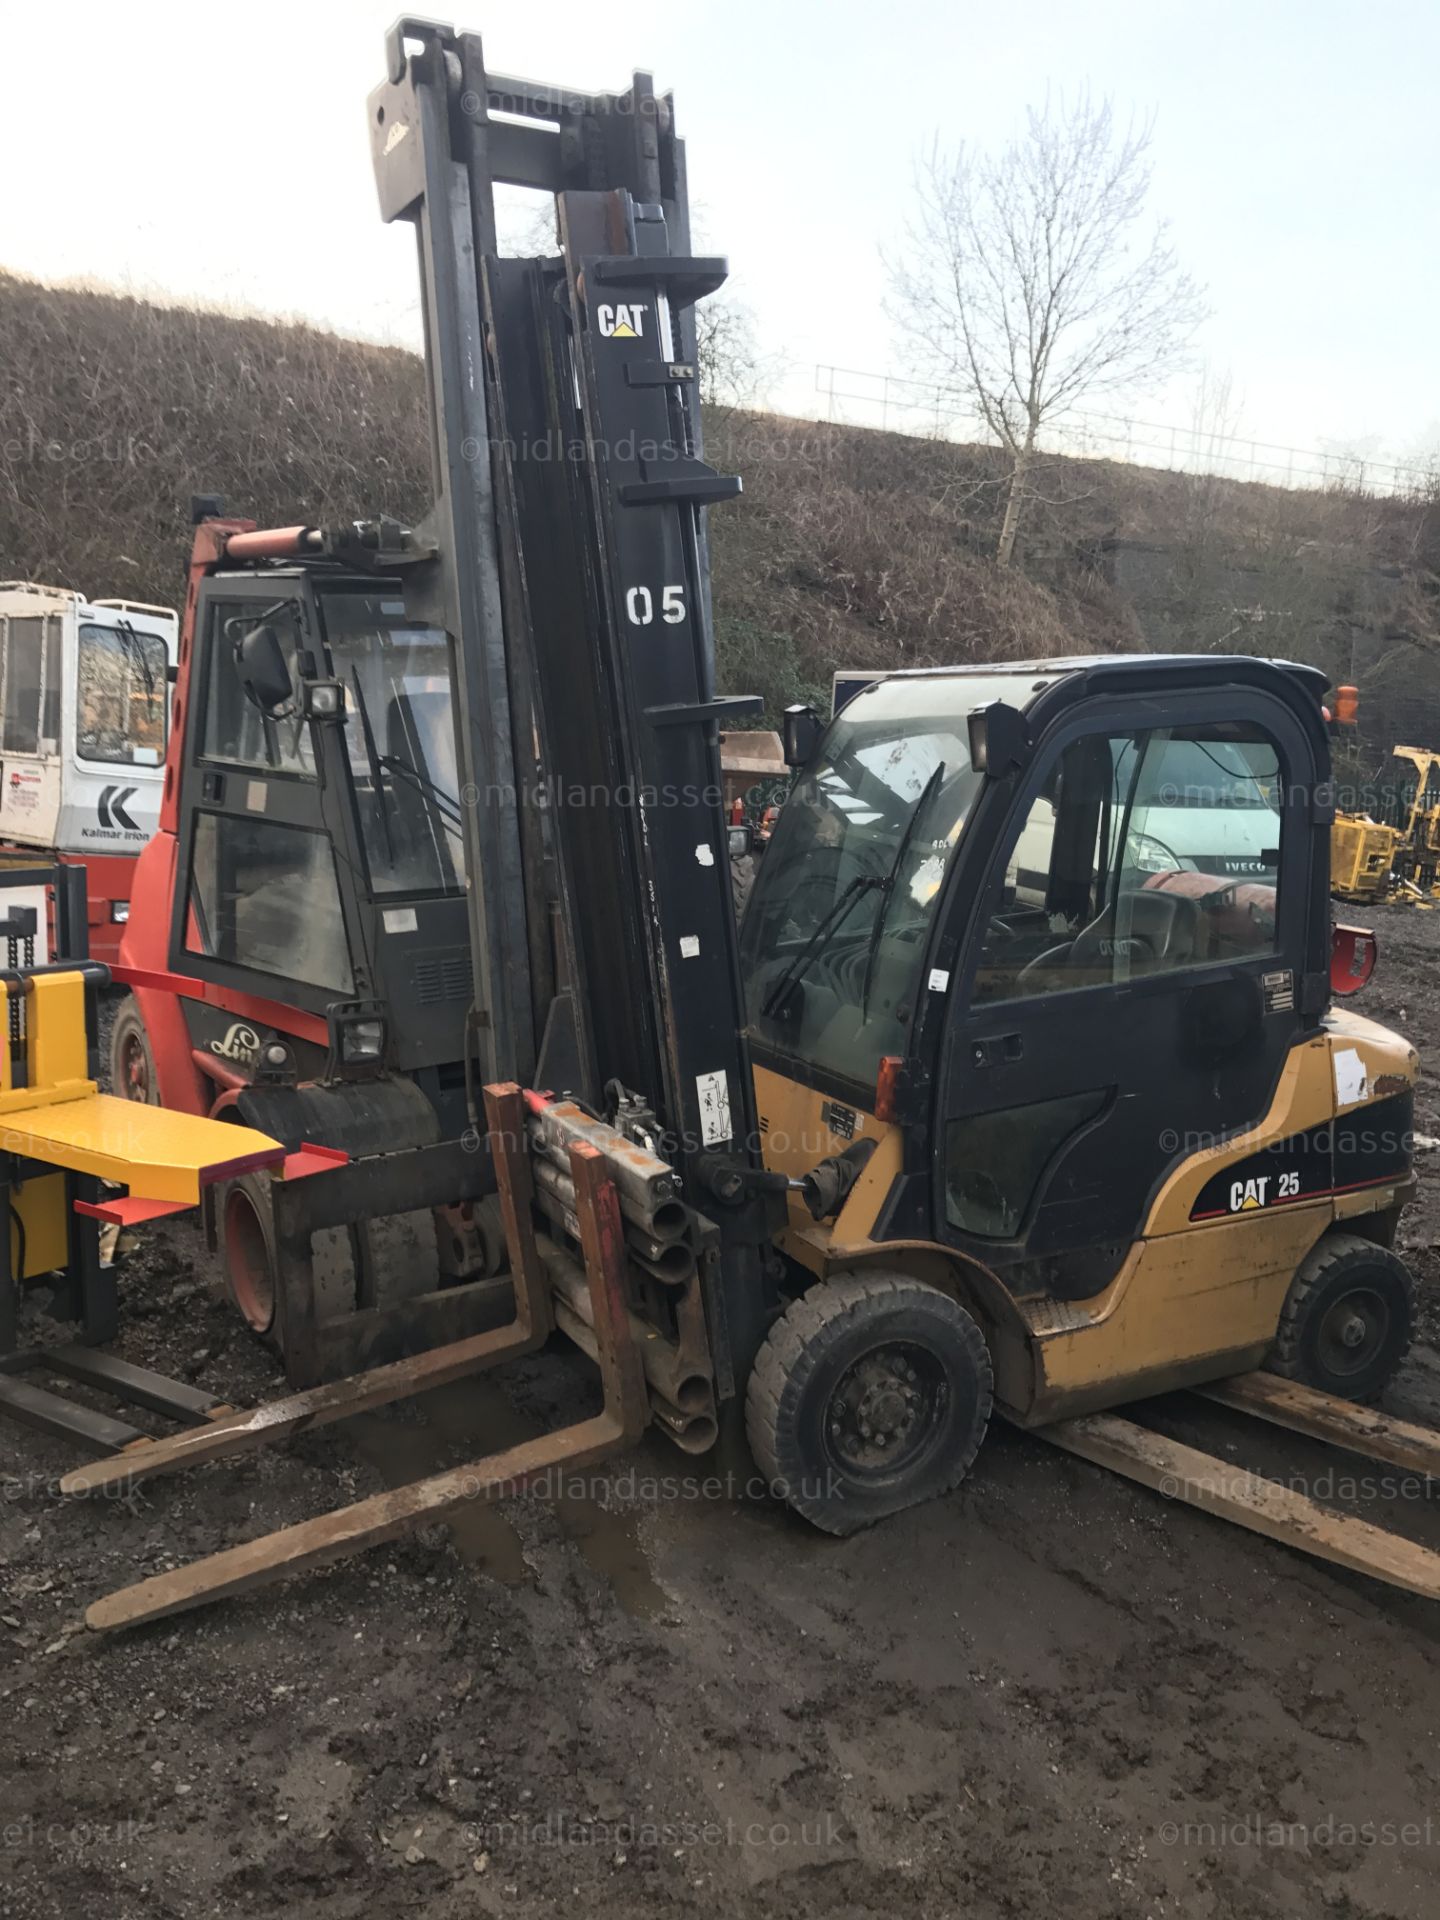 DS - 2007 CATERPILLAR 25 LPG FORK TRUCK   YEAR OF MANUFACTURE: 2007 RATED CAPACITY: 2,500 kg FORKS - Image 2 of 6